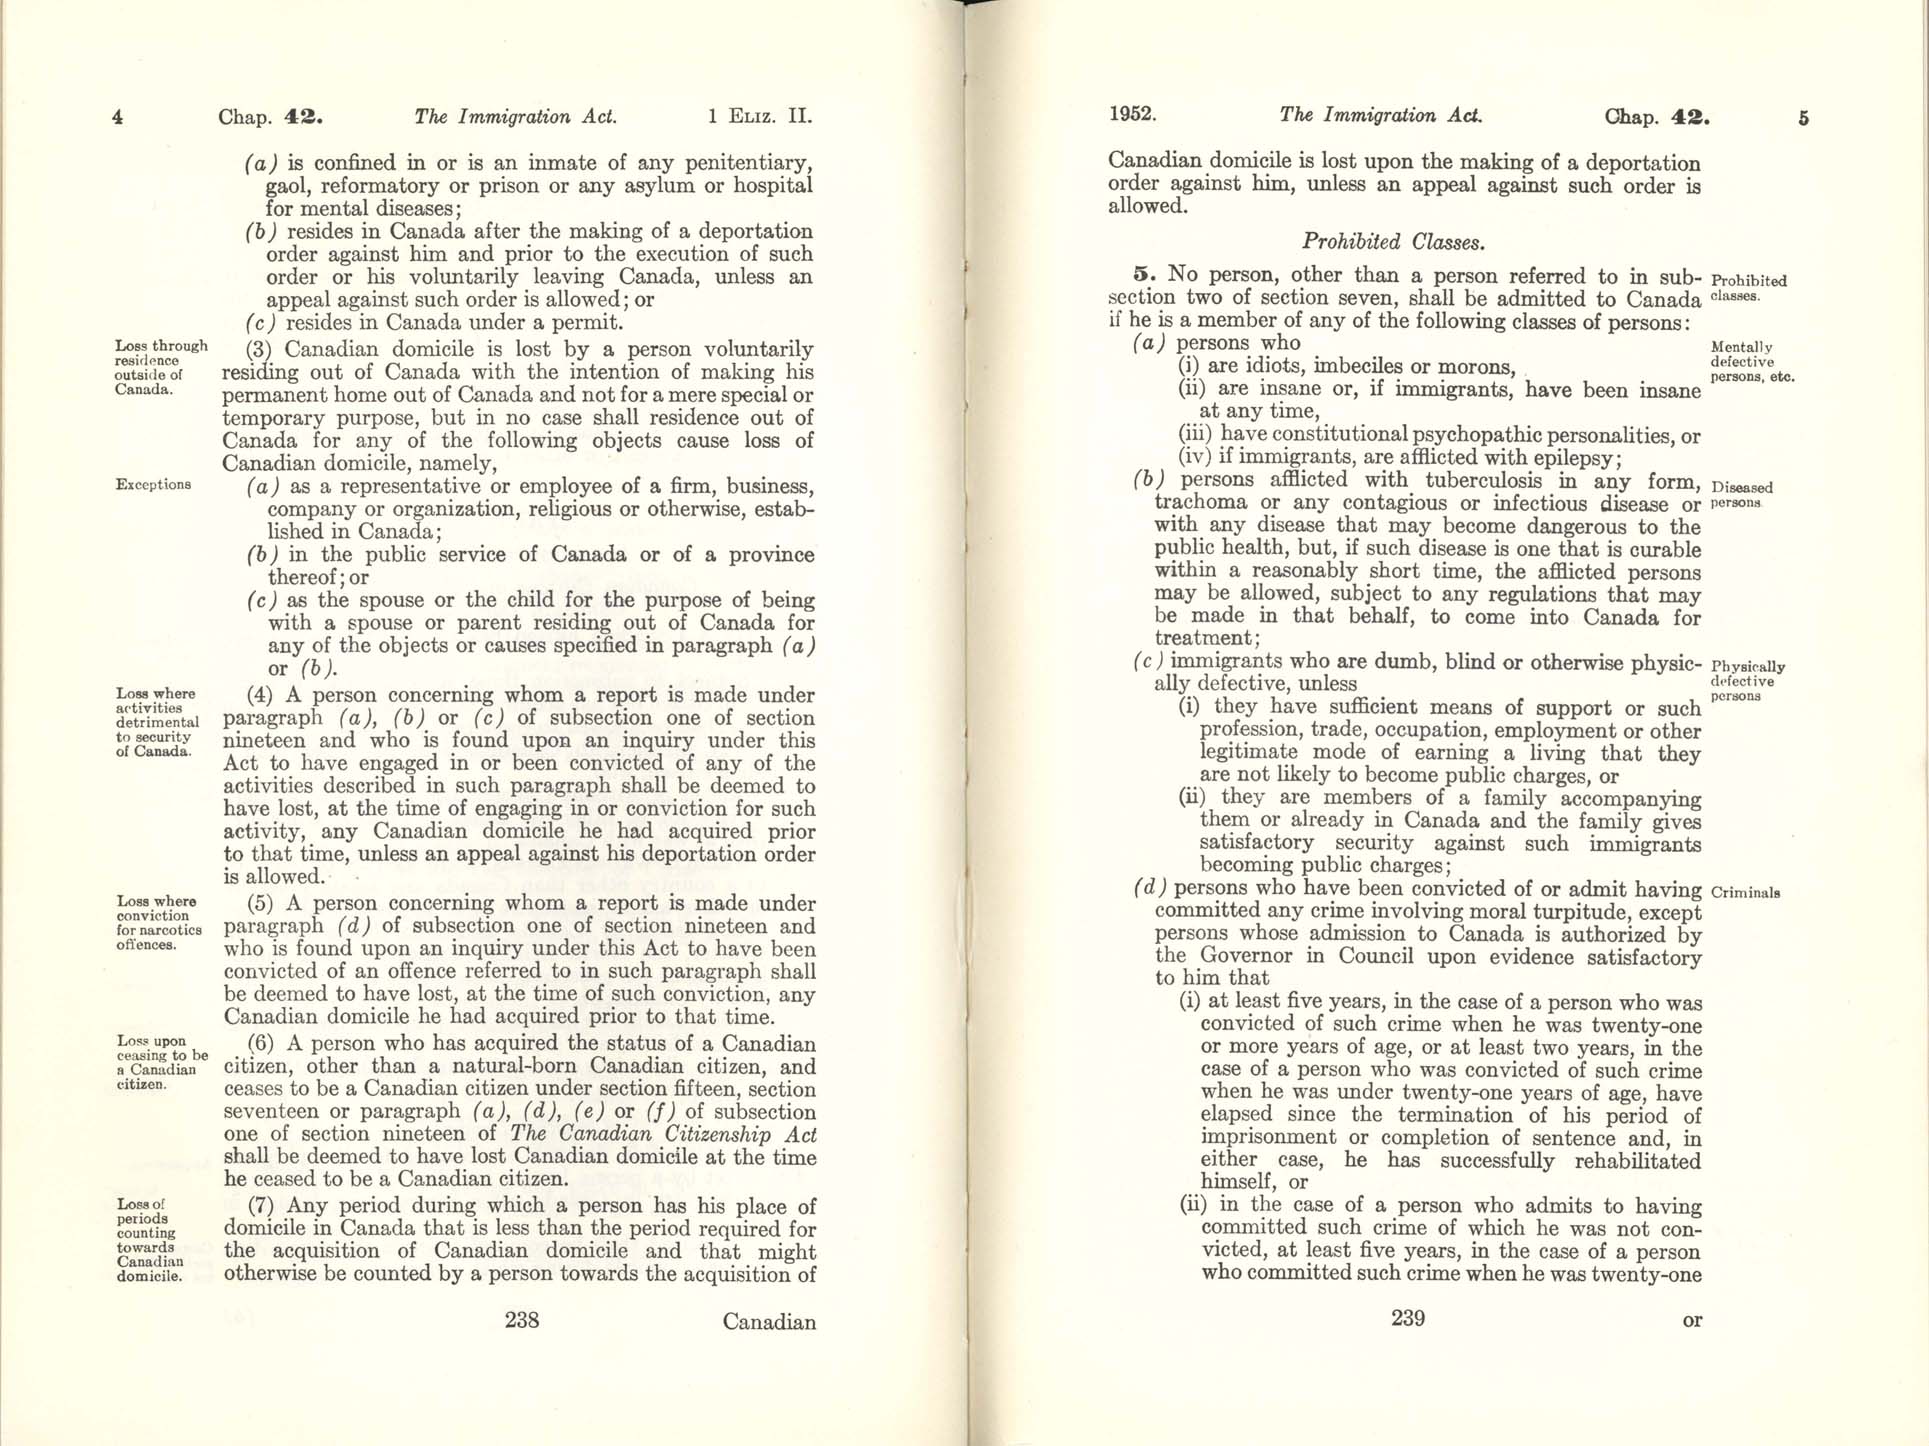 CHAP 42 Page 238, 239 Immigration Act, 1952